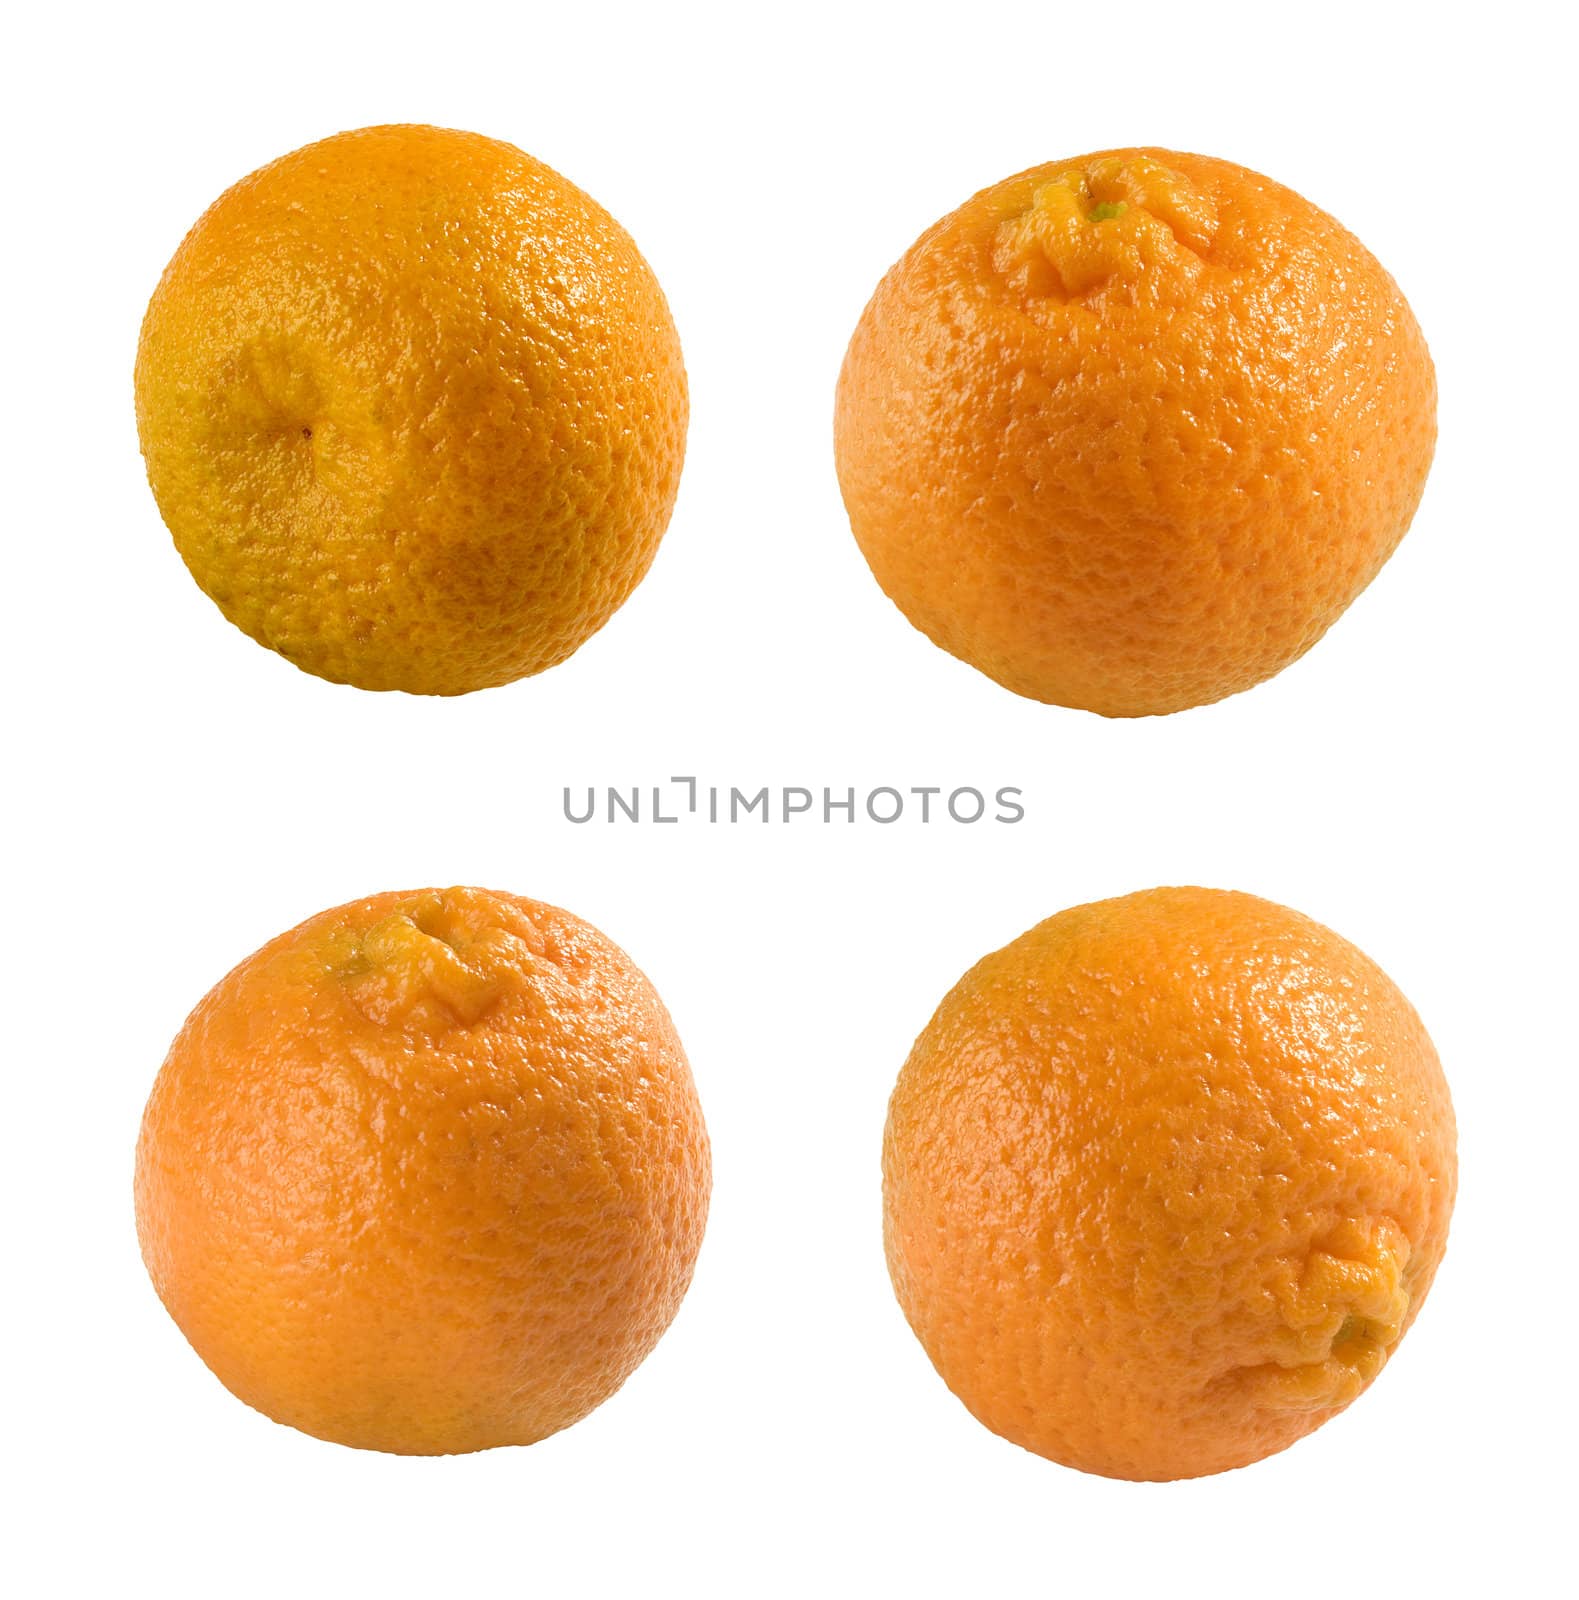 Some isolated orange tangeries on the white background